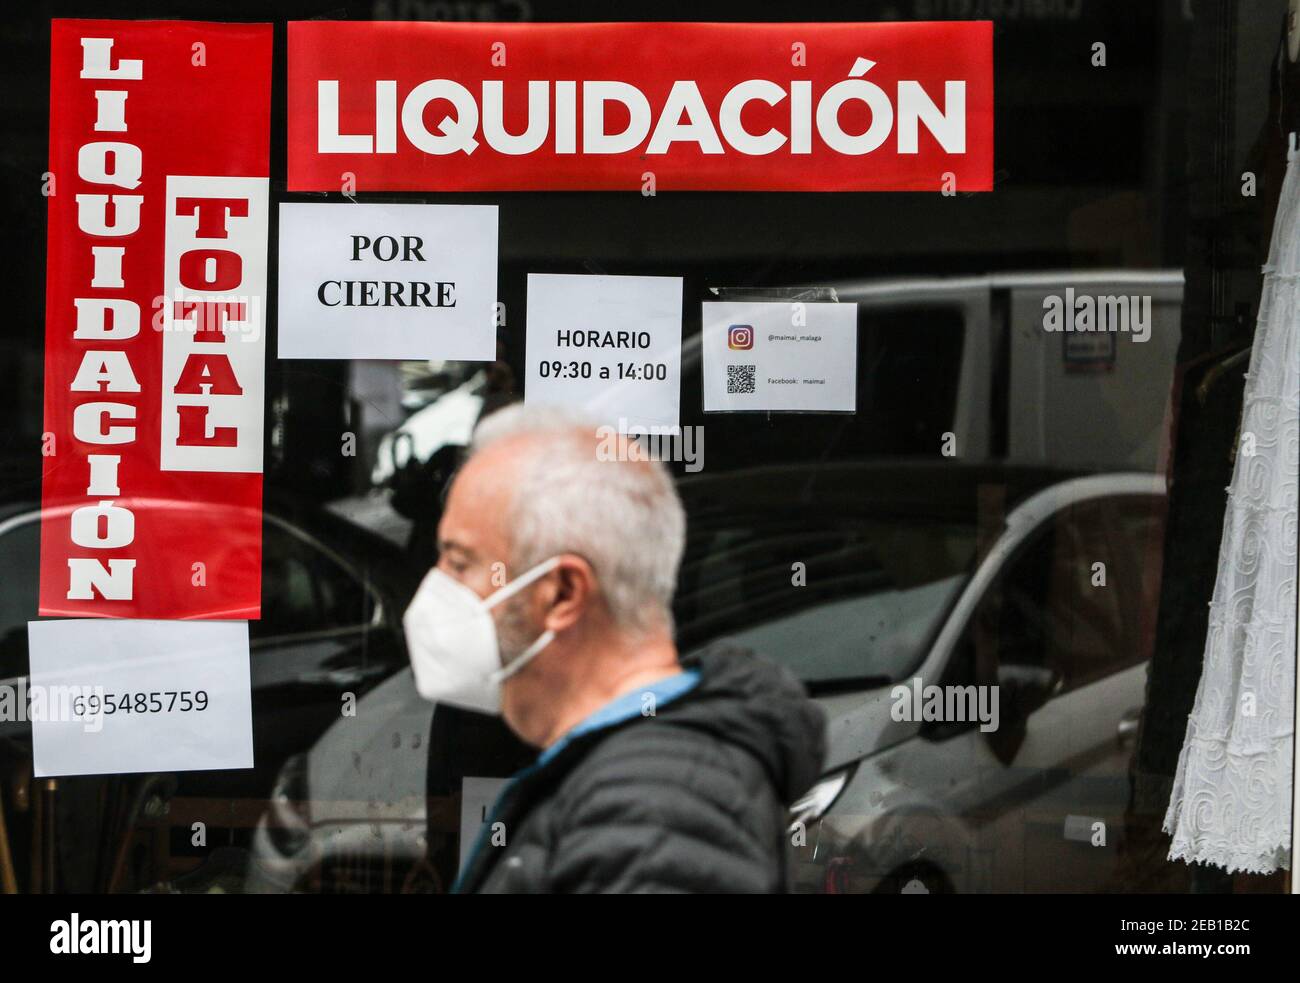 February 11, 2021 (Malaga) It does not stop increasing the number of companies, businesses, driving schools, Shops that put the settlement cartel for closure due to the health crisis of the Covid19 or coronavirus Credit: CORDON PRESS/Alamy Live News Stock Photo